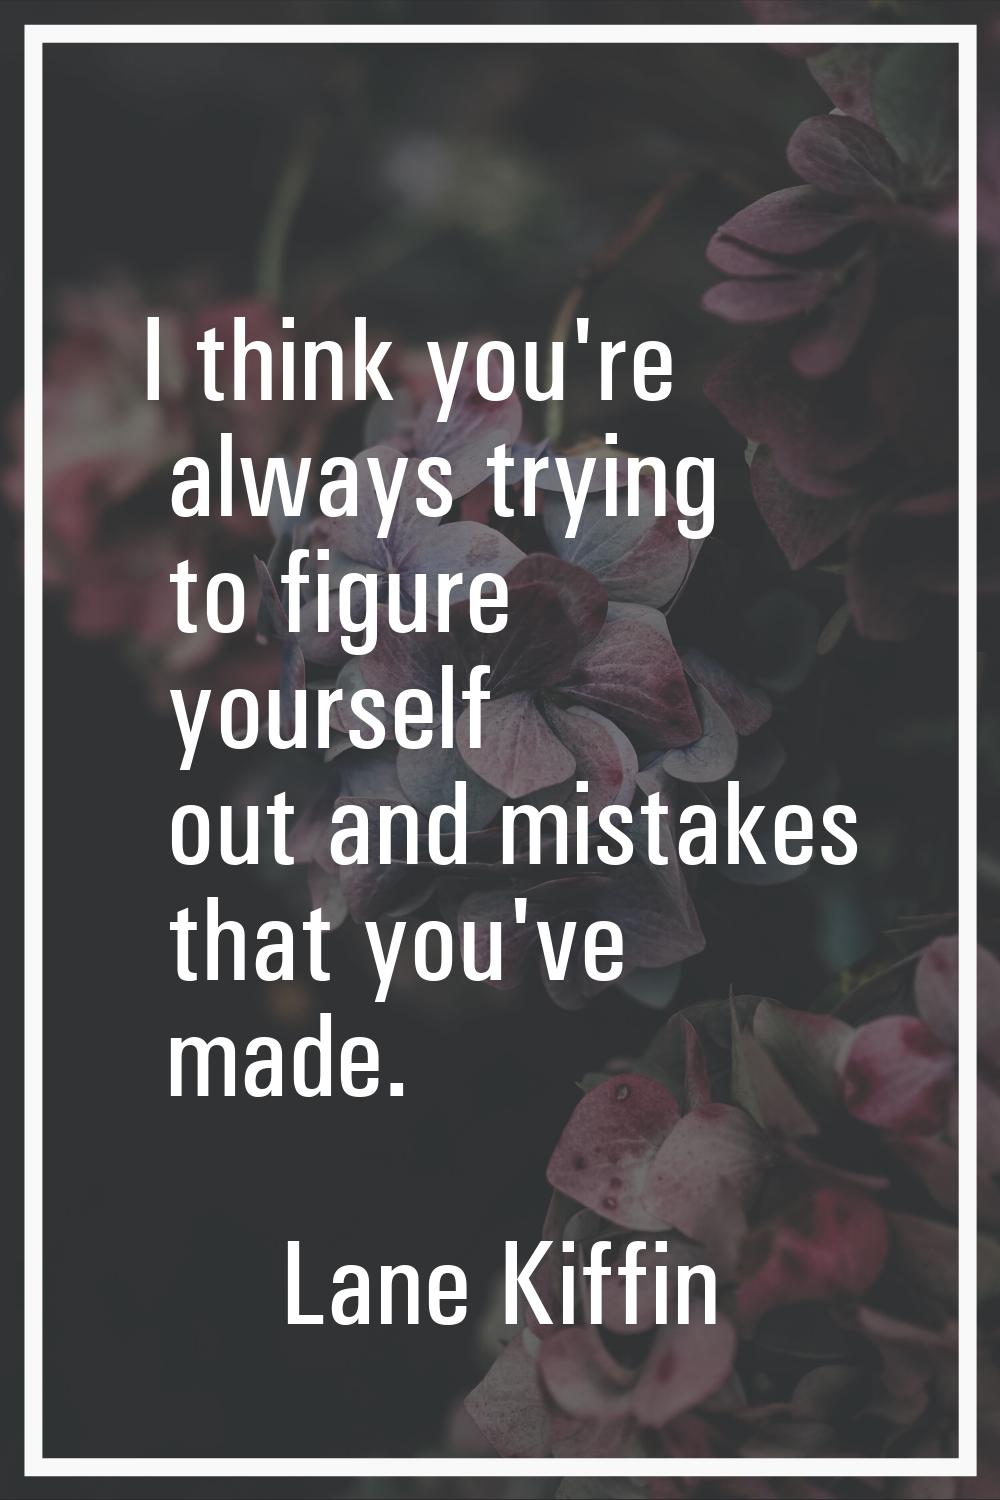 I think you're always trying to figure yourself out and mistakes that you've made.